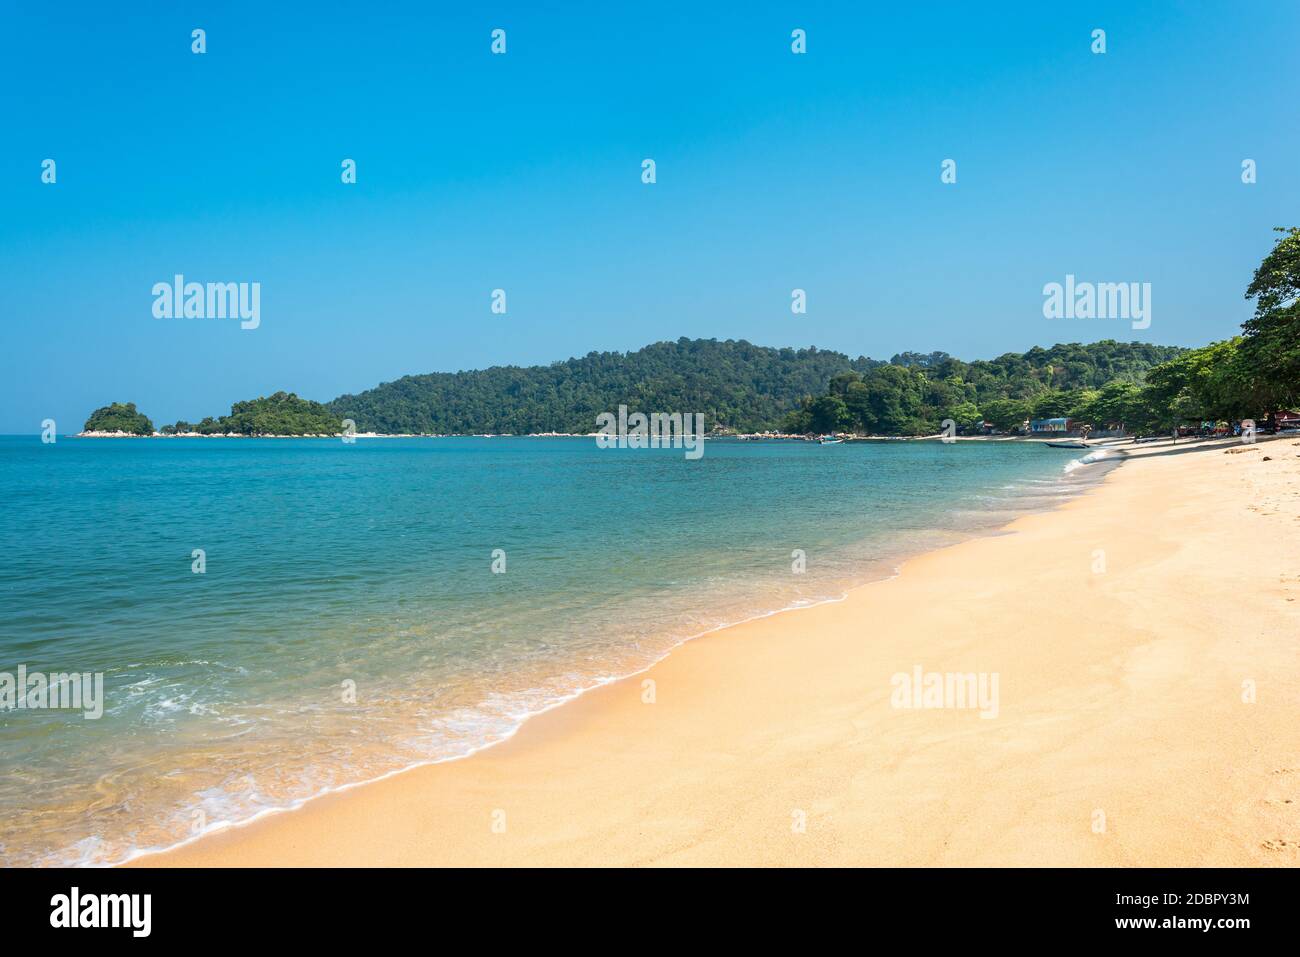 Fantastic beach at the west coast of the island of Pangkor in Malaysia  Stock Photo - Alamy